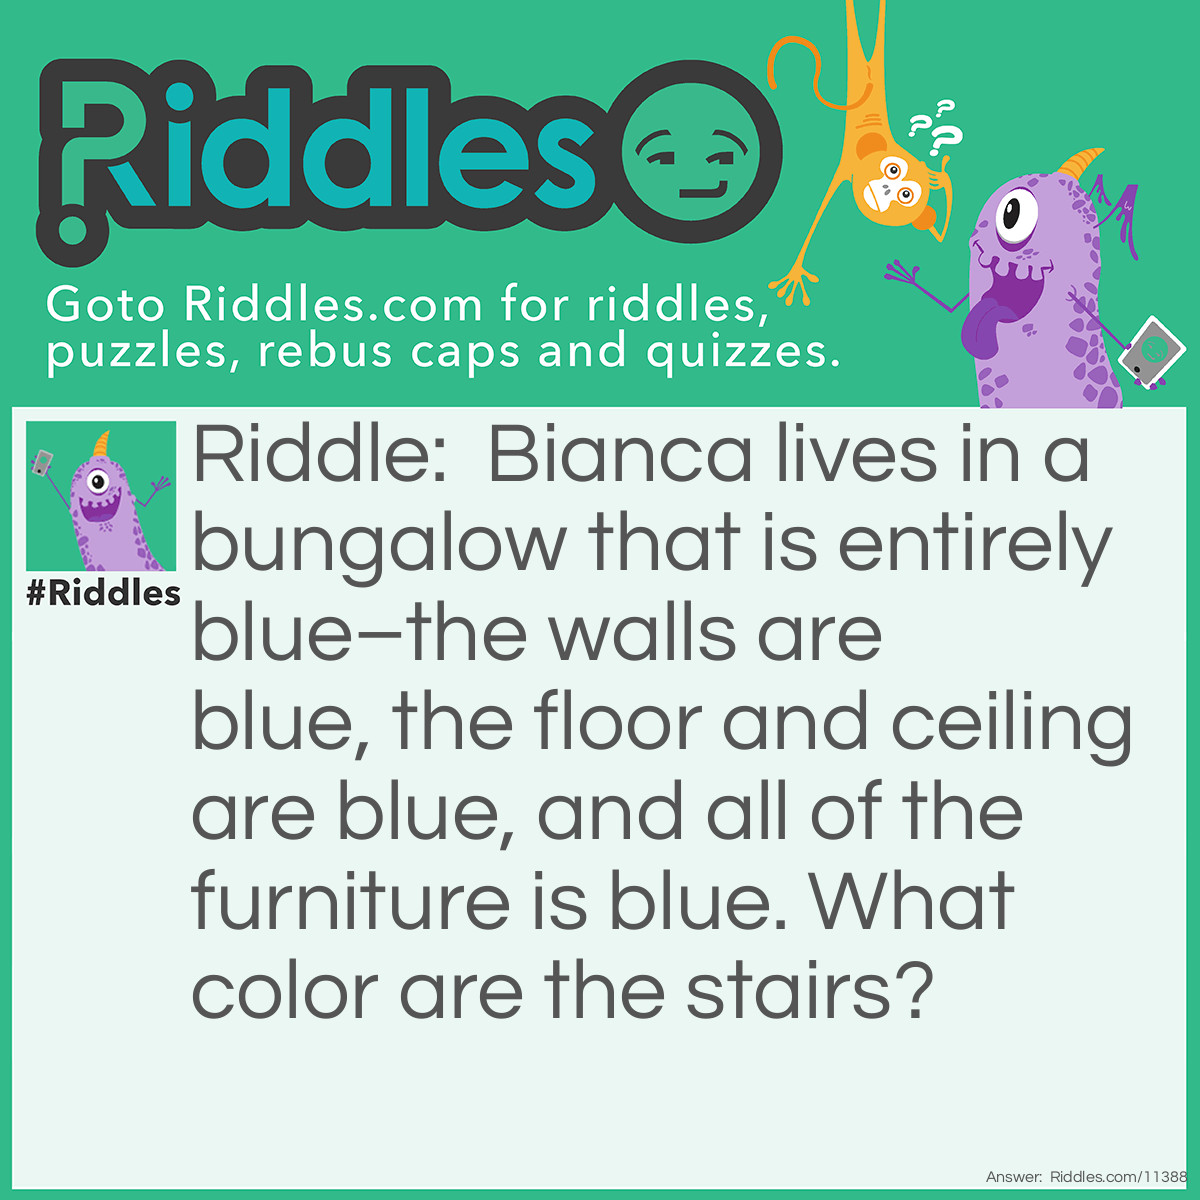 Riddle: Bianca lives in a bungalow that is entirely blue–the walls are blue, the floor and ceiling are blue, and all of the furniture is blue. What color are the stairs? Answer: A bungalow only has one floor; therefore, the stairs wouldn't be any color because they don't exist.